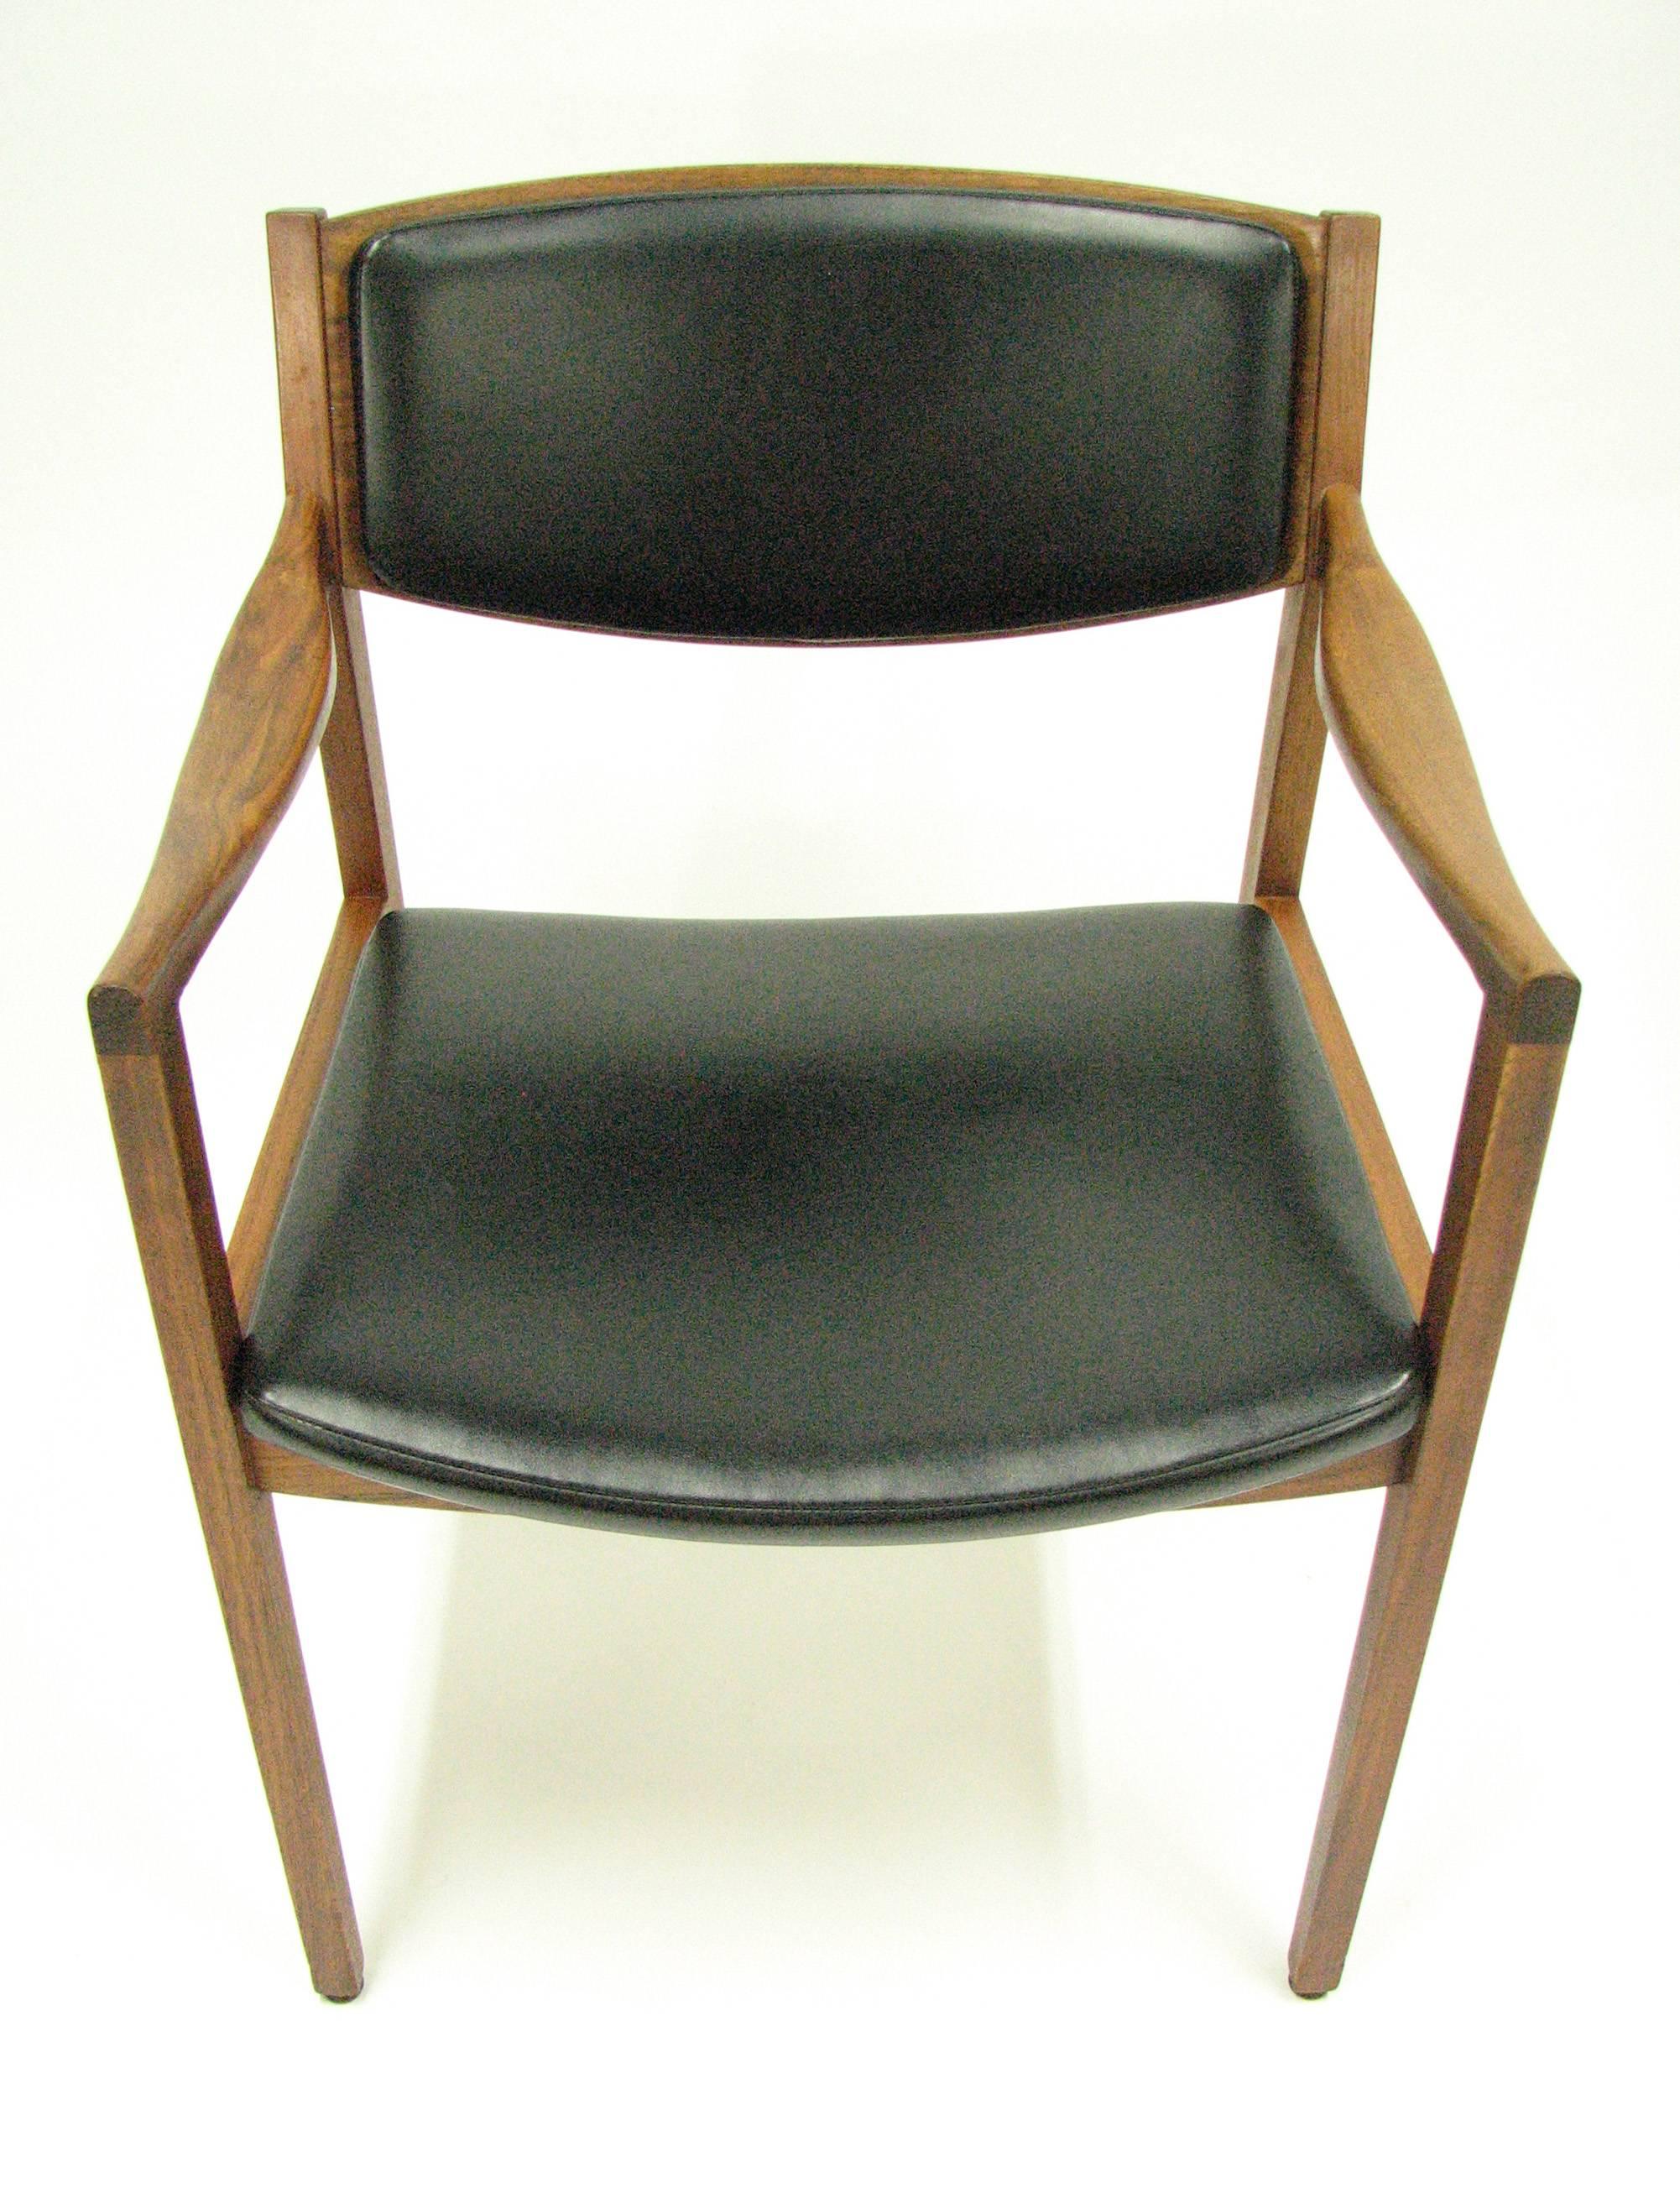 Pair of Classic Mid-Century Gunlocke Chairs in the Manner of Jens Risom 1